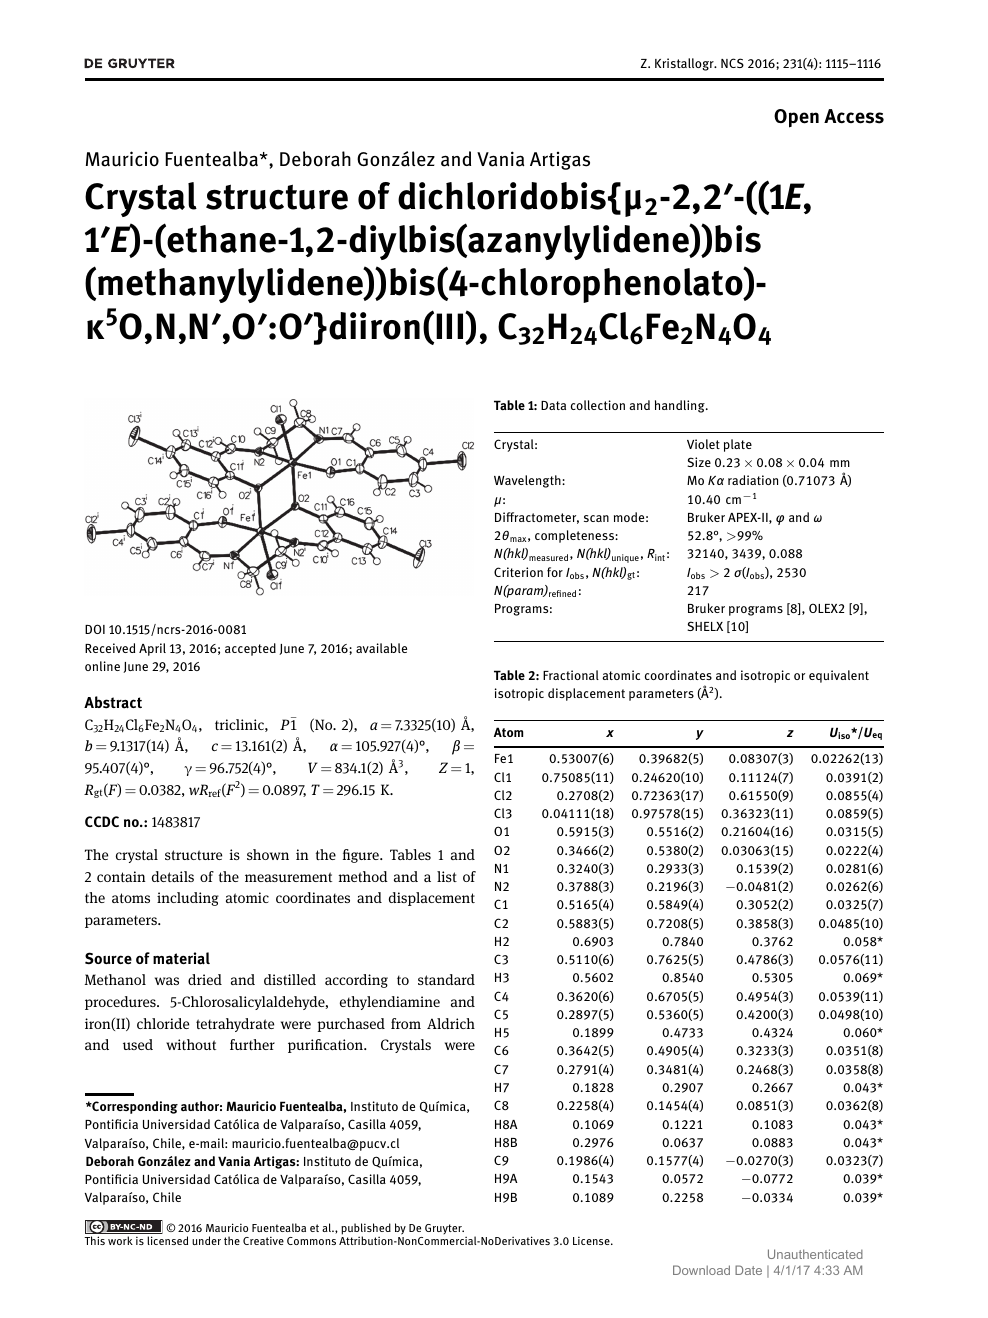 Crystal Structure Of Dichloridobis M2 2 2 1e 1 E Ethane 1 2 Diylbis Azanylylidene Bis Methanylylidene Bis 4 Chlorophenolato K5o N N O O Diiron Iii C32h24cl6fe2n4o4 Topic Of Research Paper In Chemical Sciences Download Scholarly Article